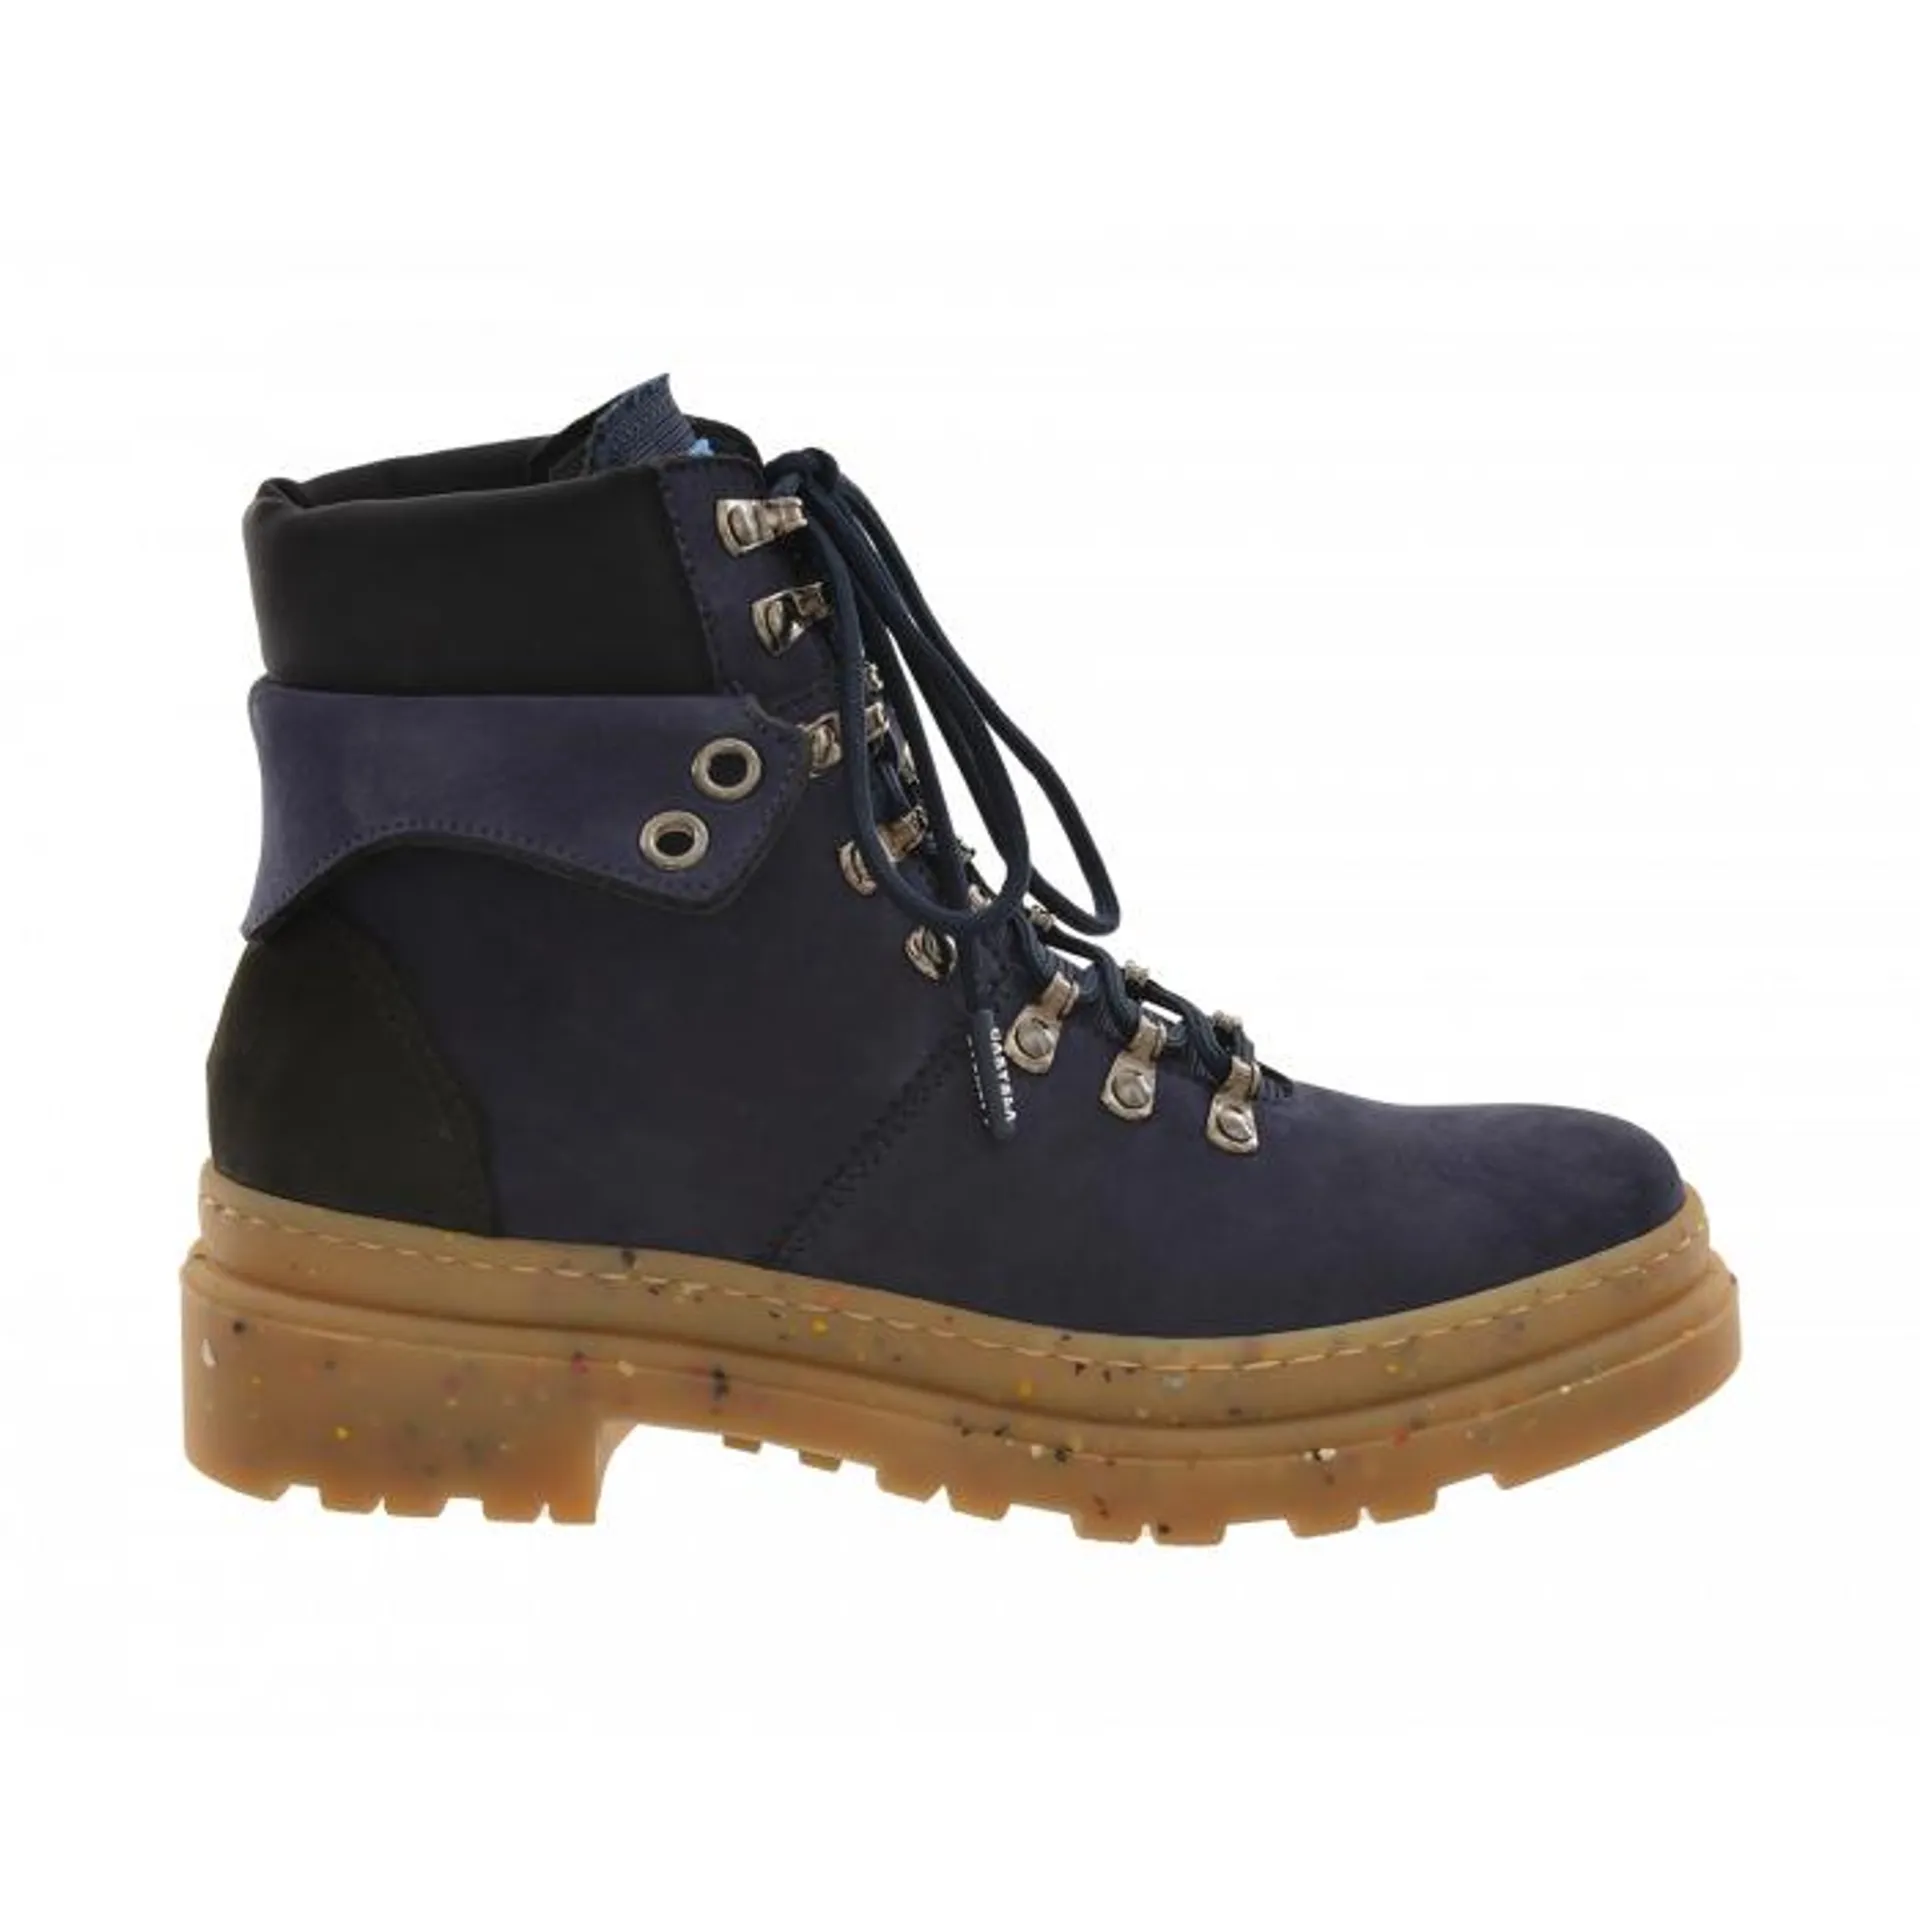 Carvela Weekend Suede Hiker Boots W Gum Outsole